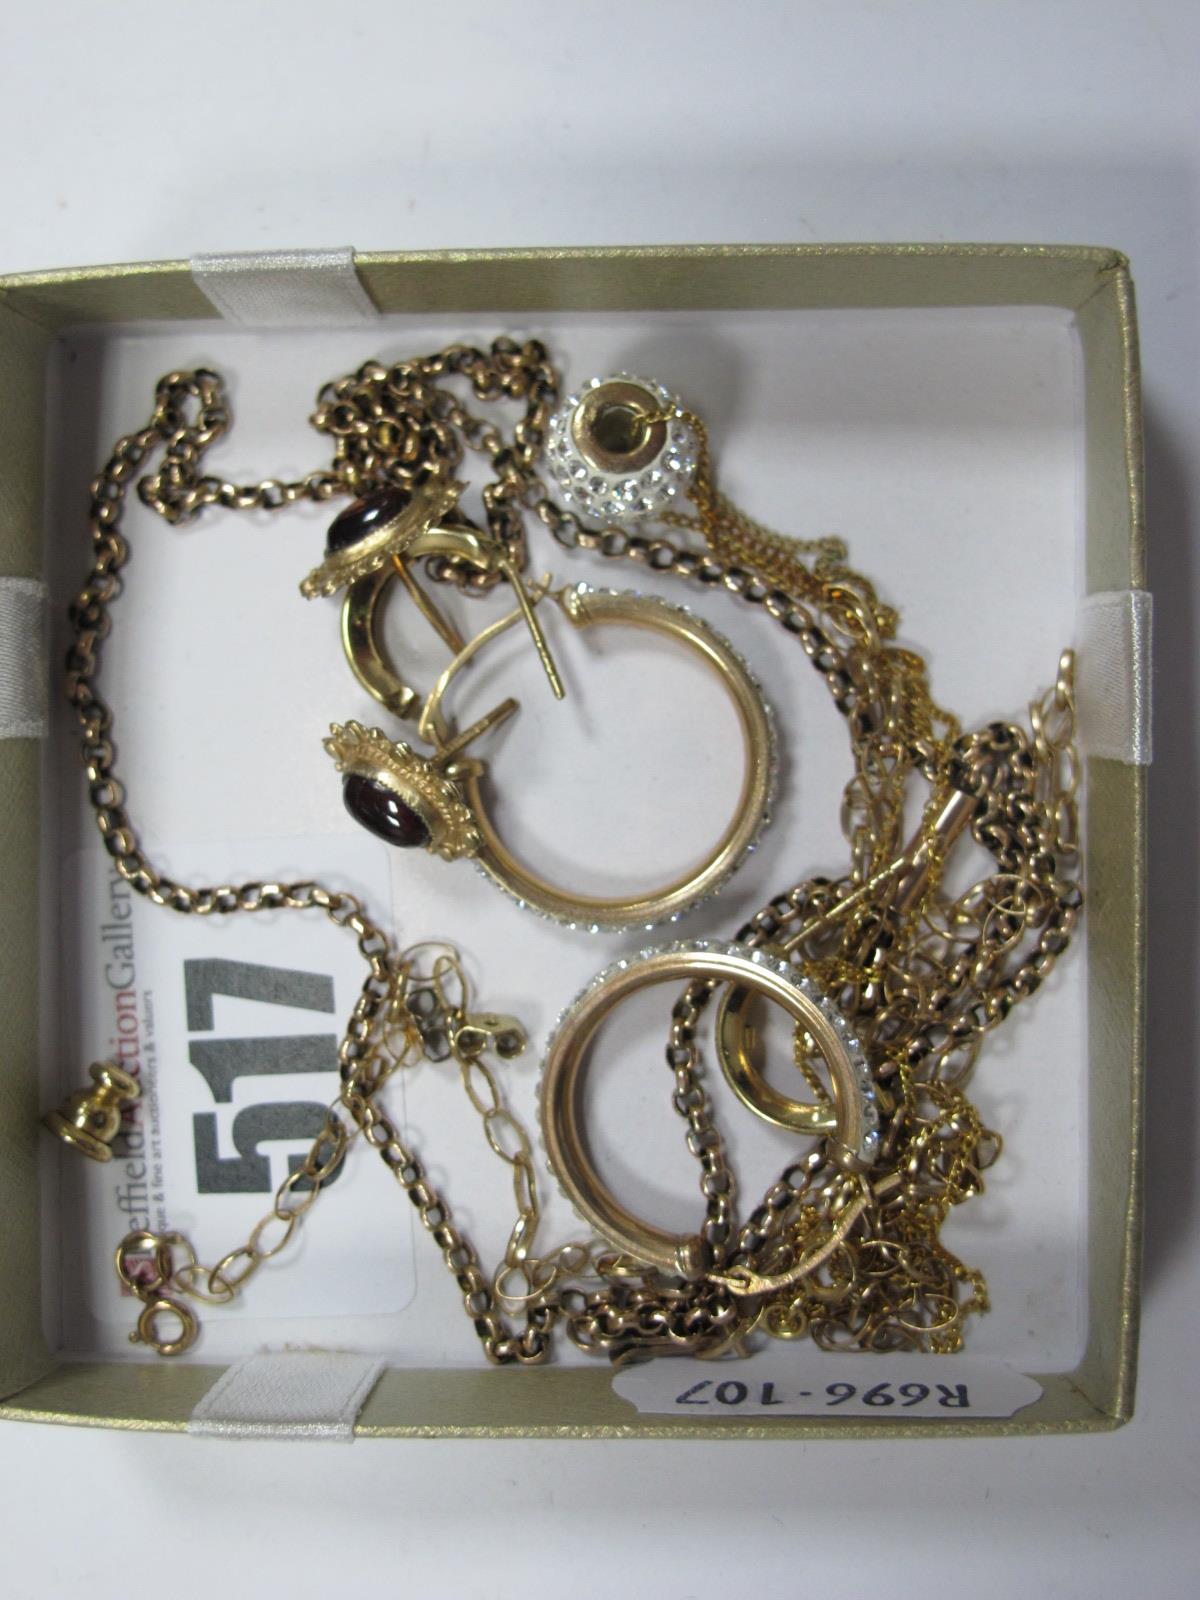 A Belcher Link Chain Stamped "9c", another similar 9ct gold belcher link chain, a pair of 9ct gold